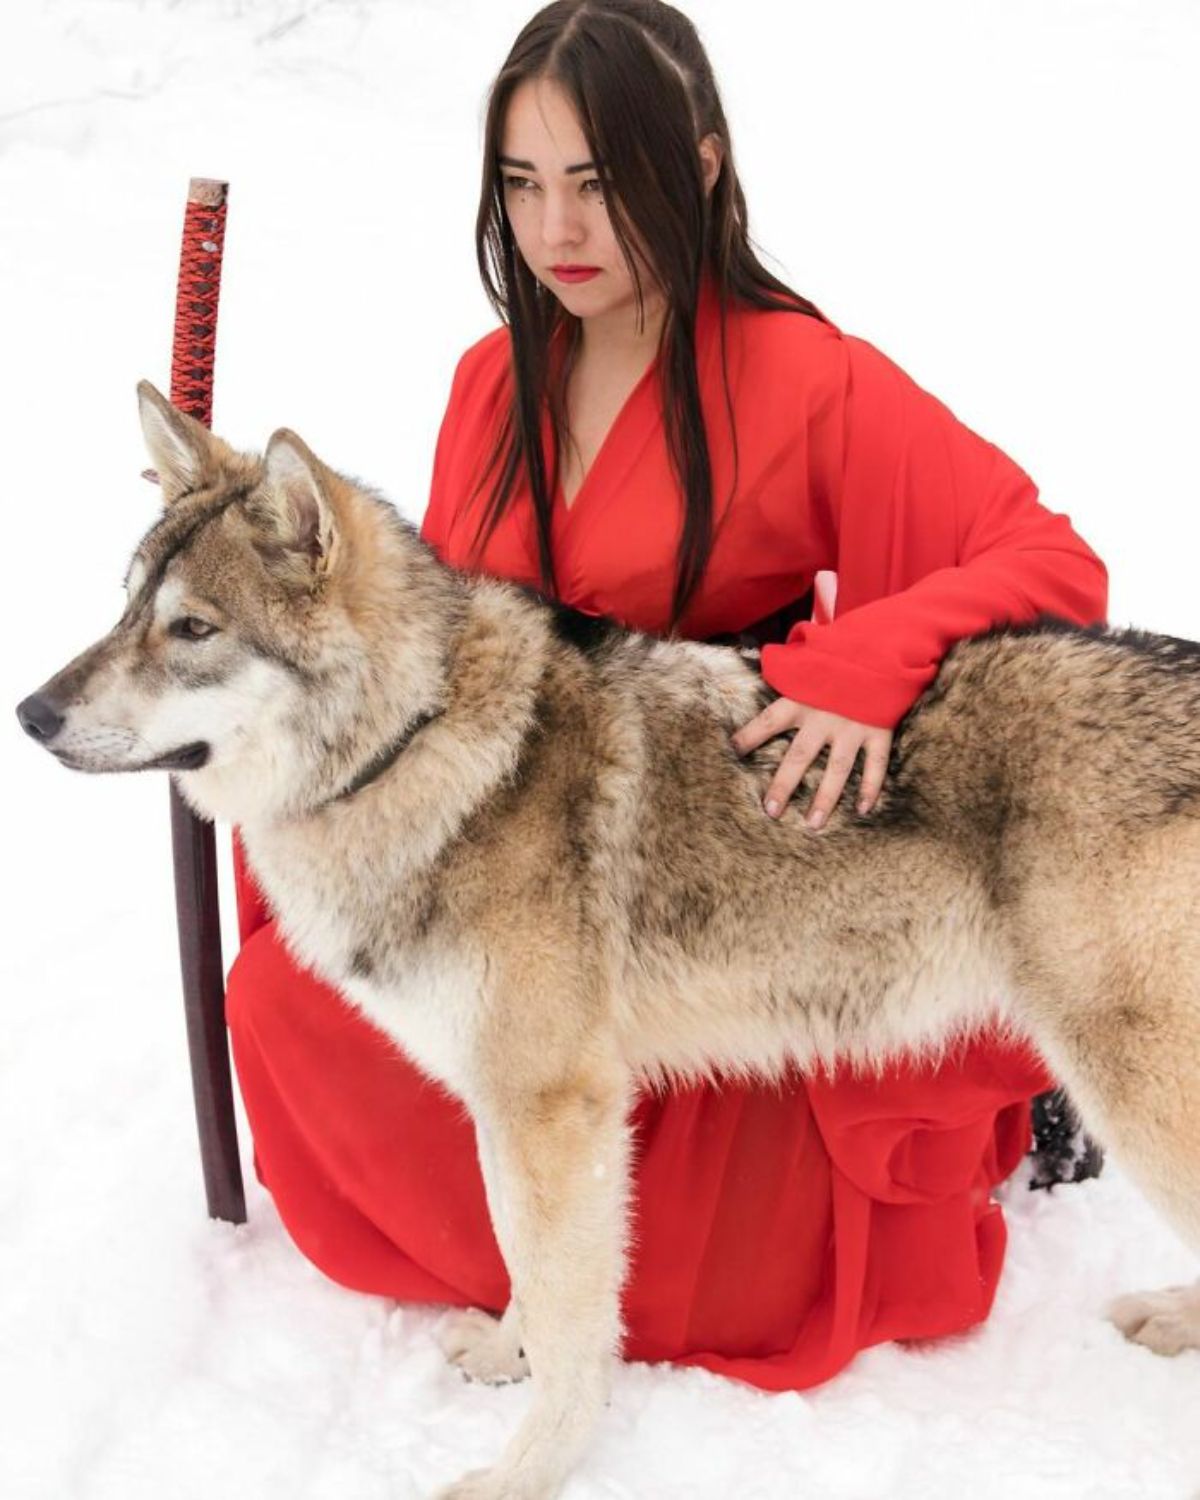 wolf standing in snow next to a woman wearing red holding a sword in the snow facing left